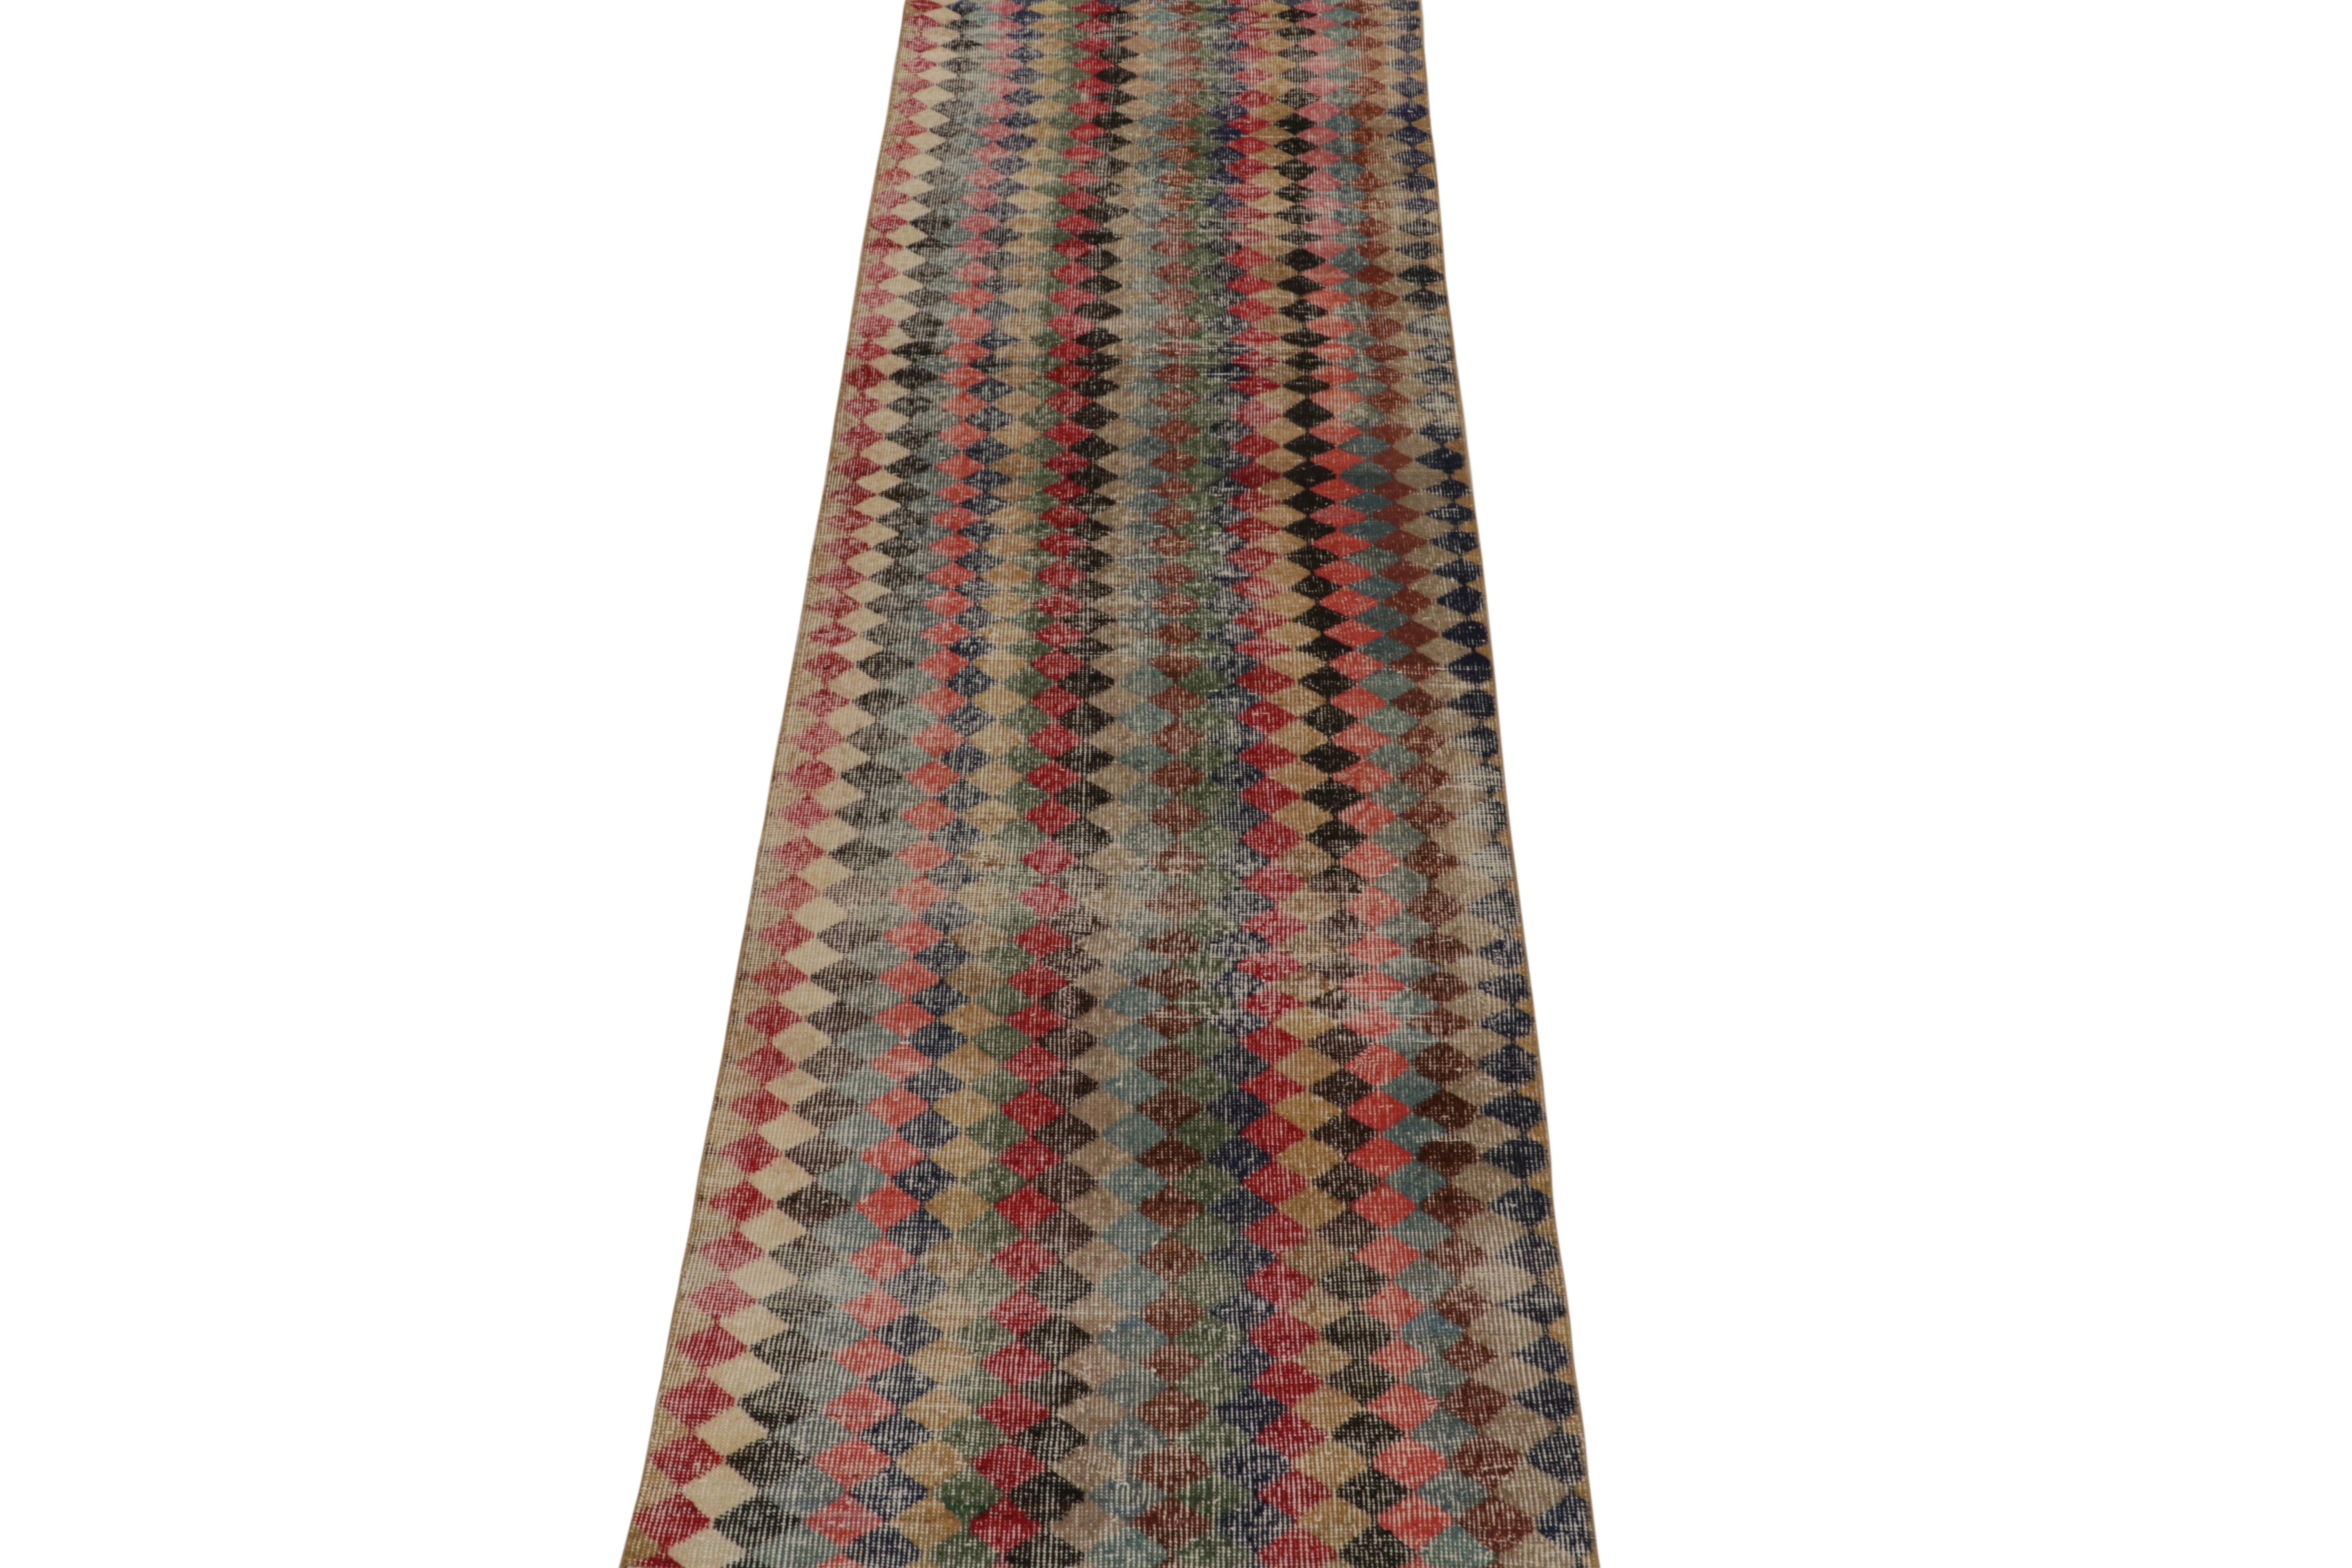 This vintage 3x10 runner is a new addition to Rug & Kilim’s Mid-Century Pasha Collection. This line is a commemoration, with rare curations we believe to hail from multidisciplinary Turkish designer Zeki Müren.

Further on the Design:

This